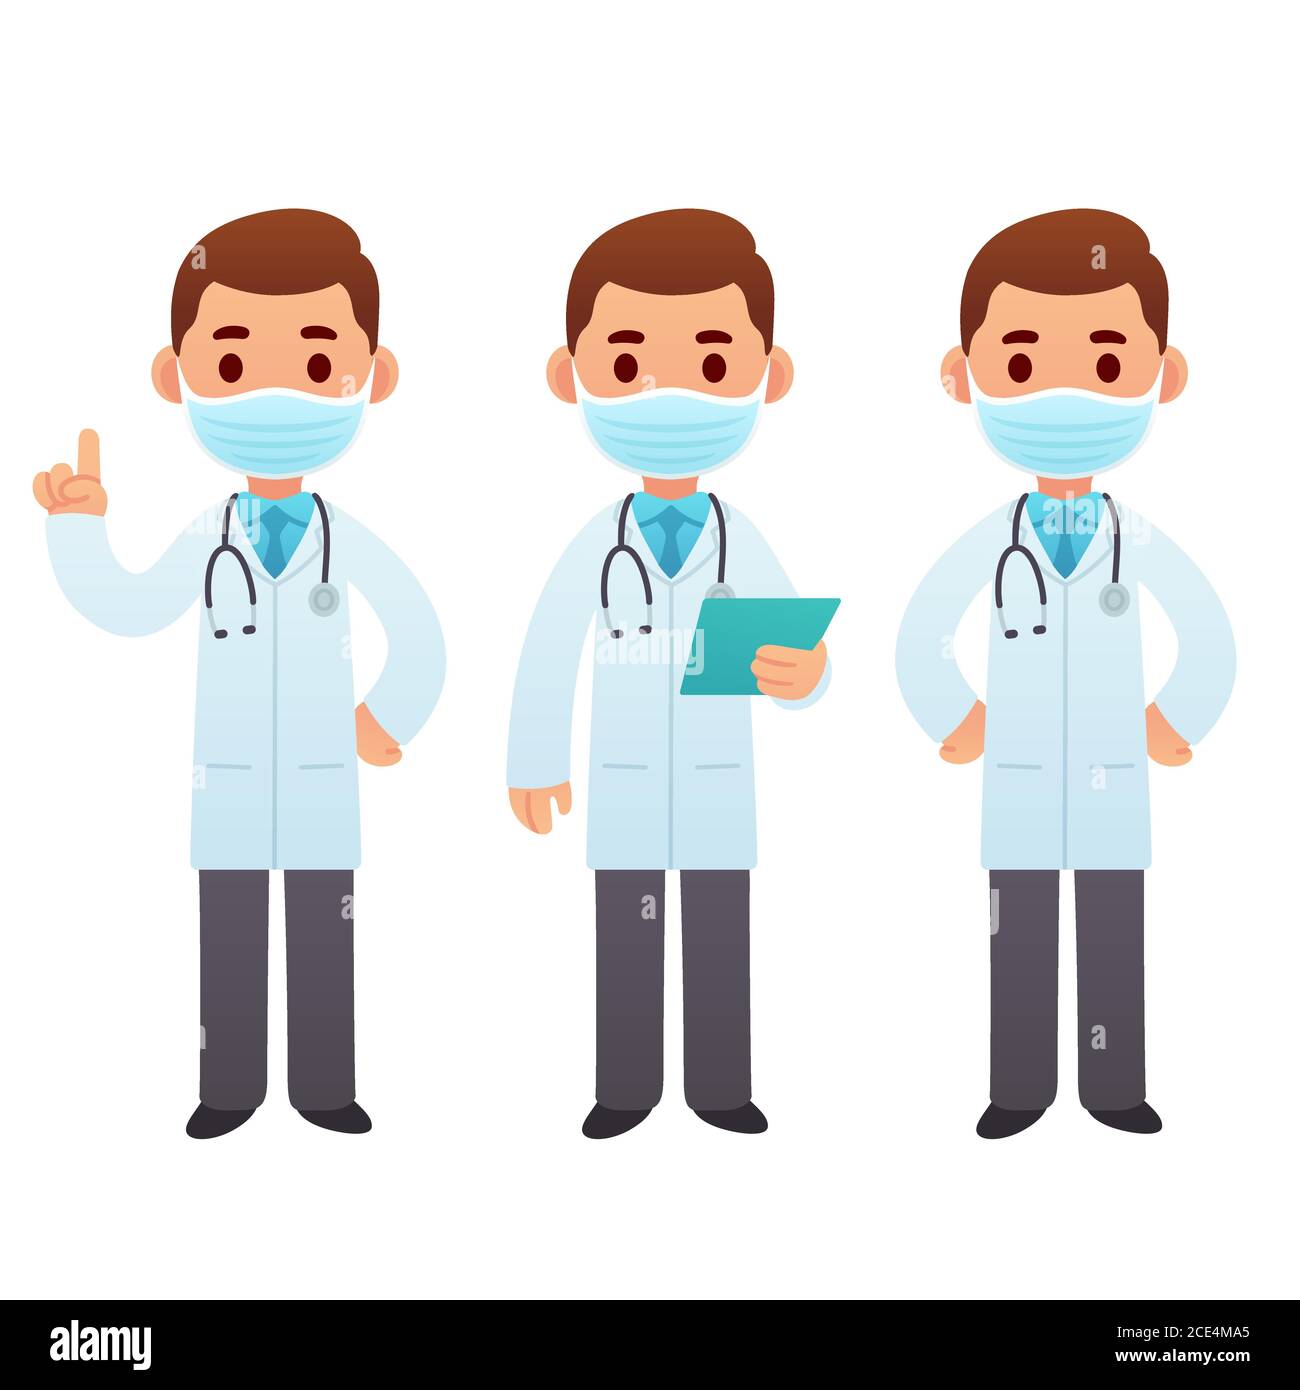 Cartoon doctor character illustration set. Male medic in face mask standing and pointing. Cute cartoon medical worker vector clip art. Stock Vector